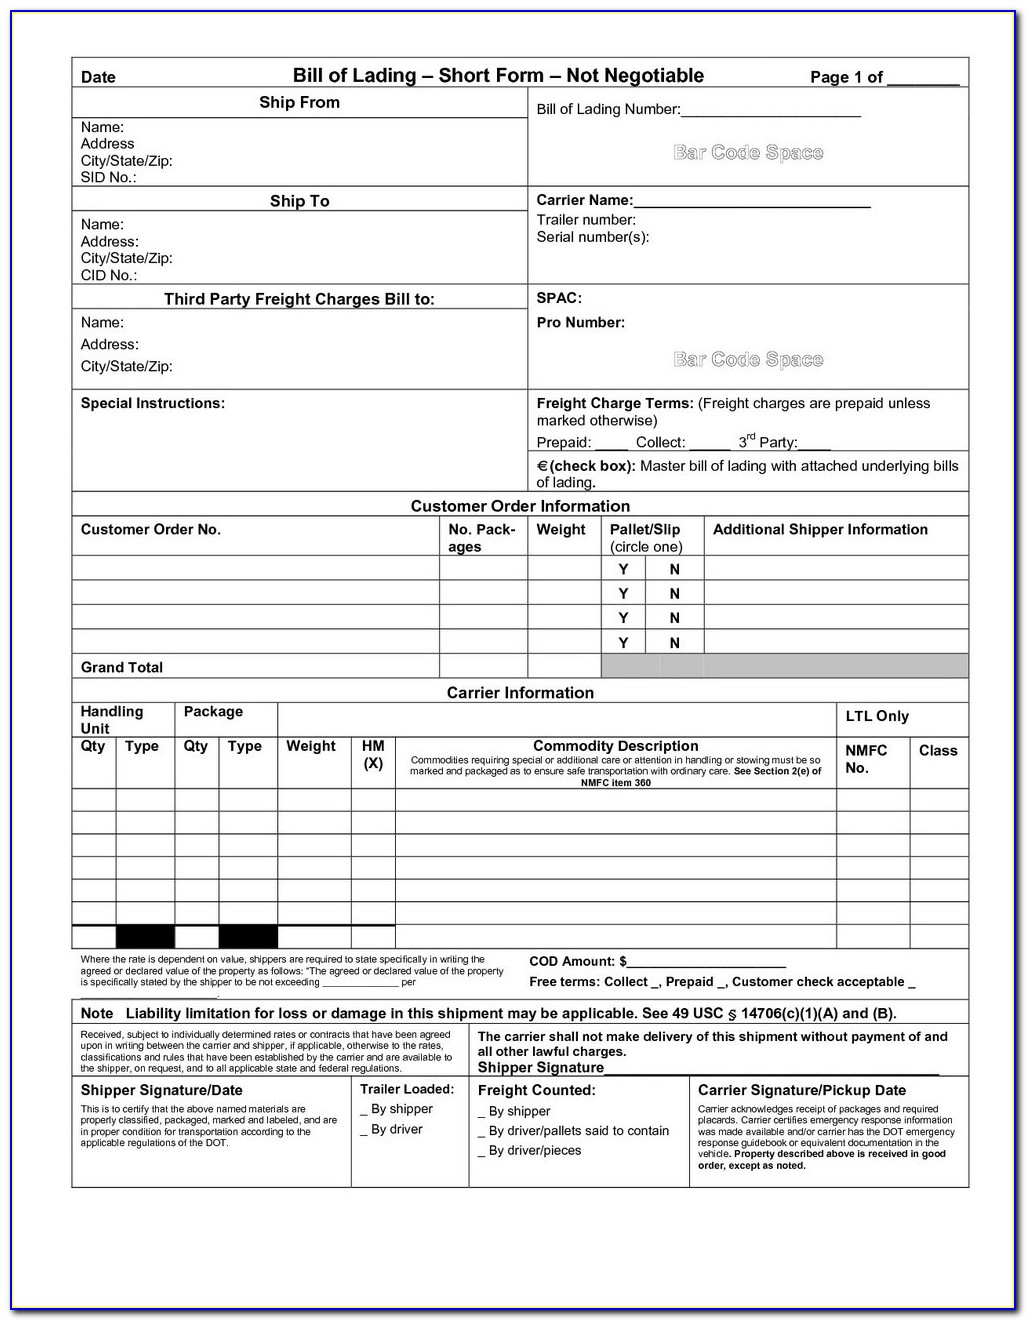 Straight Bill Of Lading Short Form Template Free